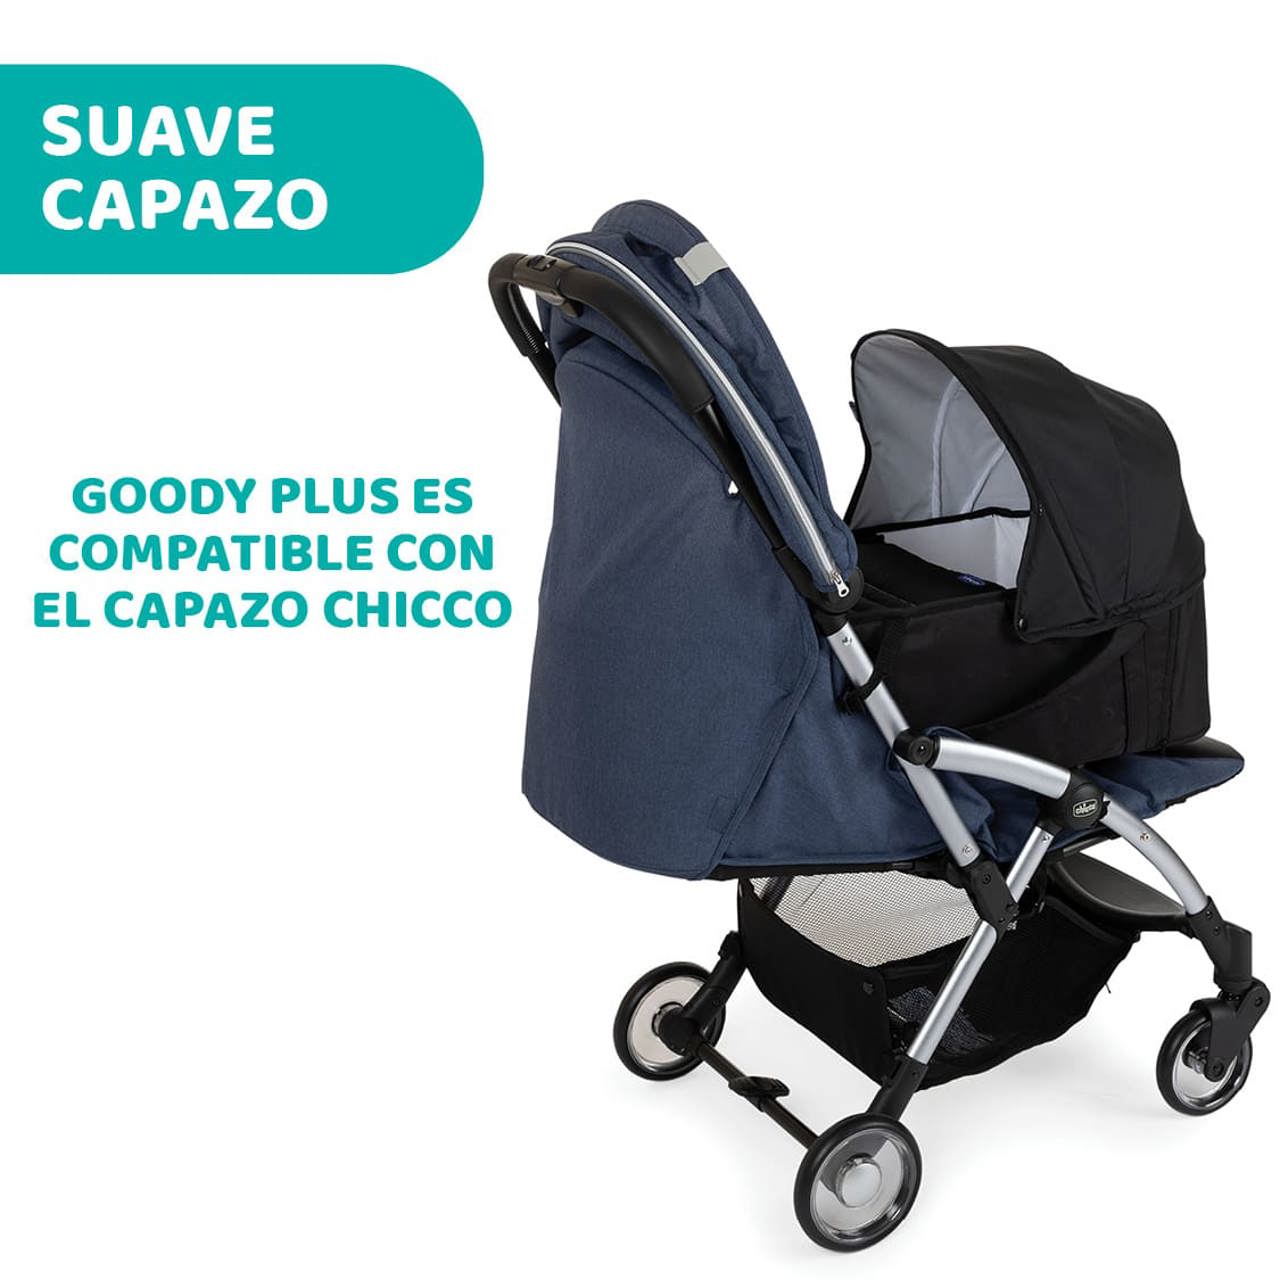 Goody Plus Silla de paseo image number 11